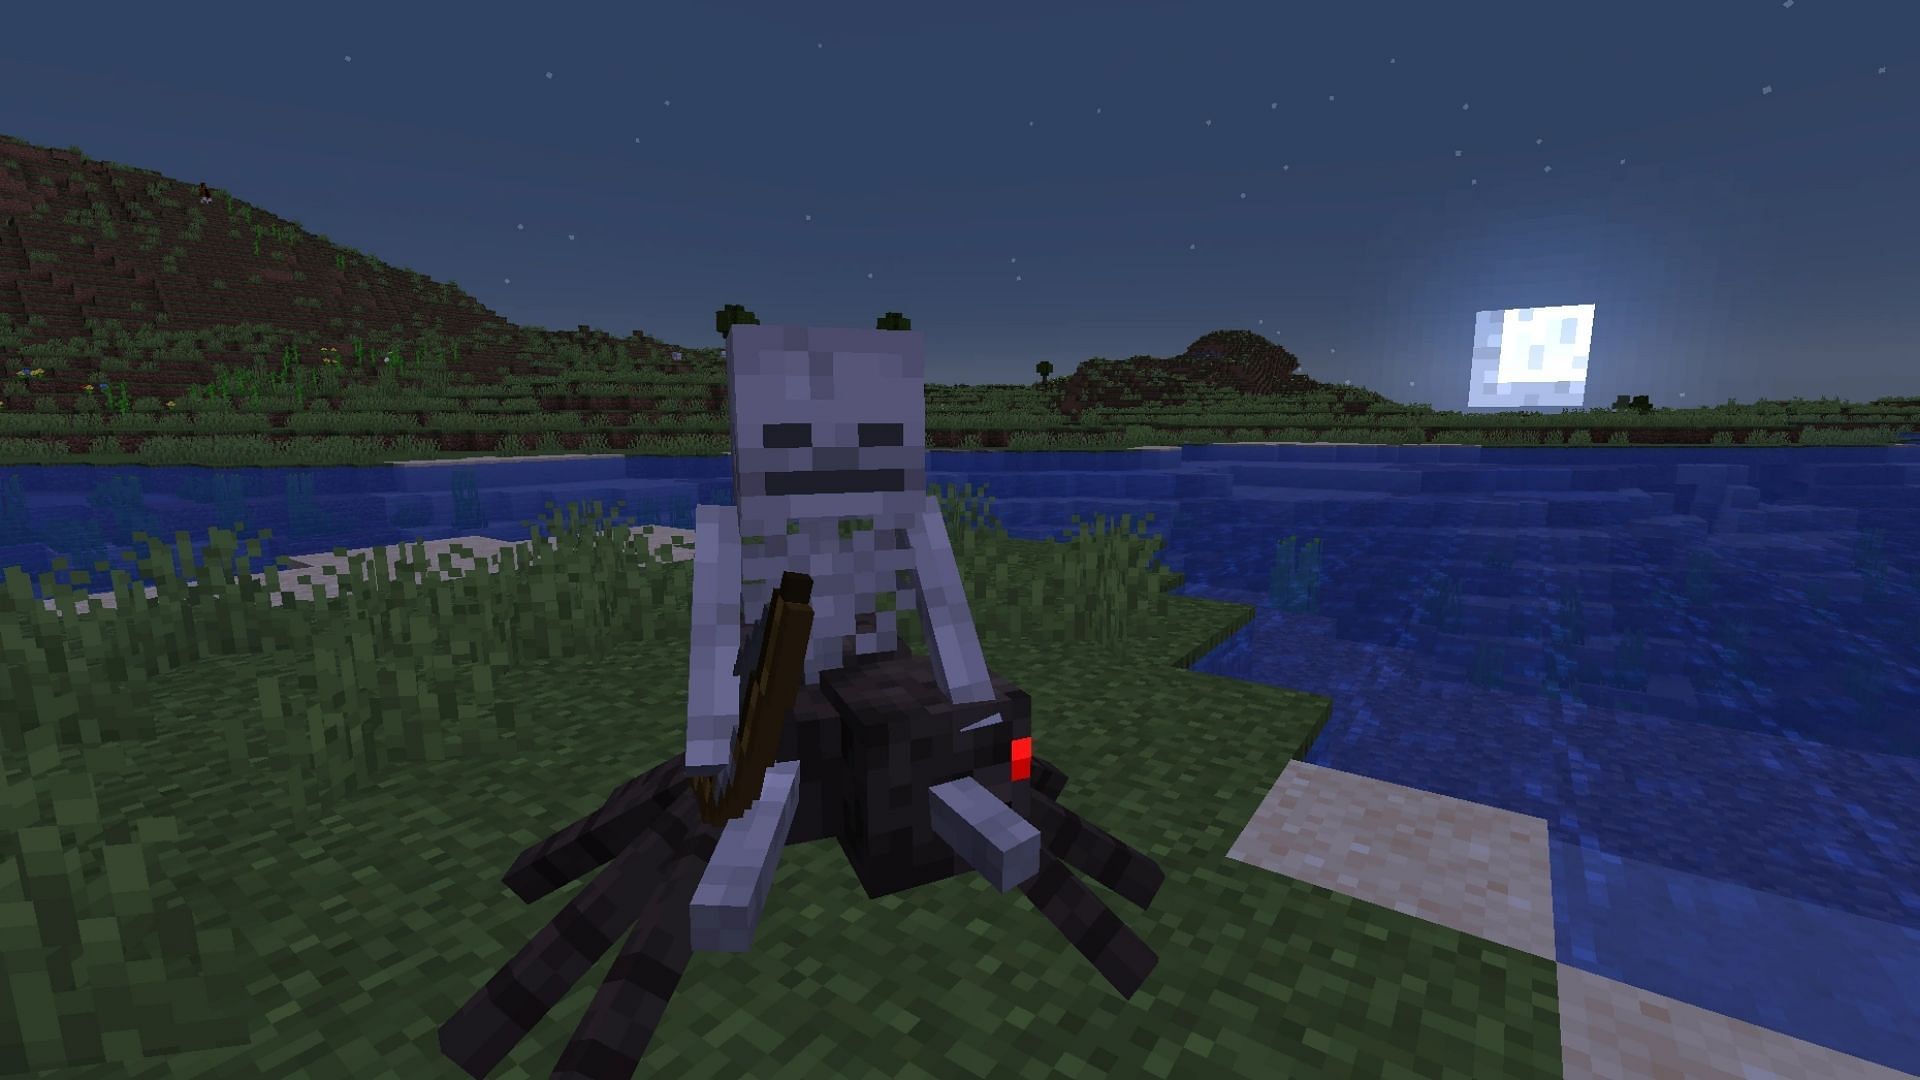 Spider jockeys are extremely rare variant that spawns (Image via Minecraft Wiki)